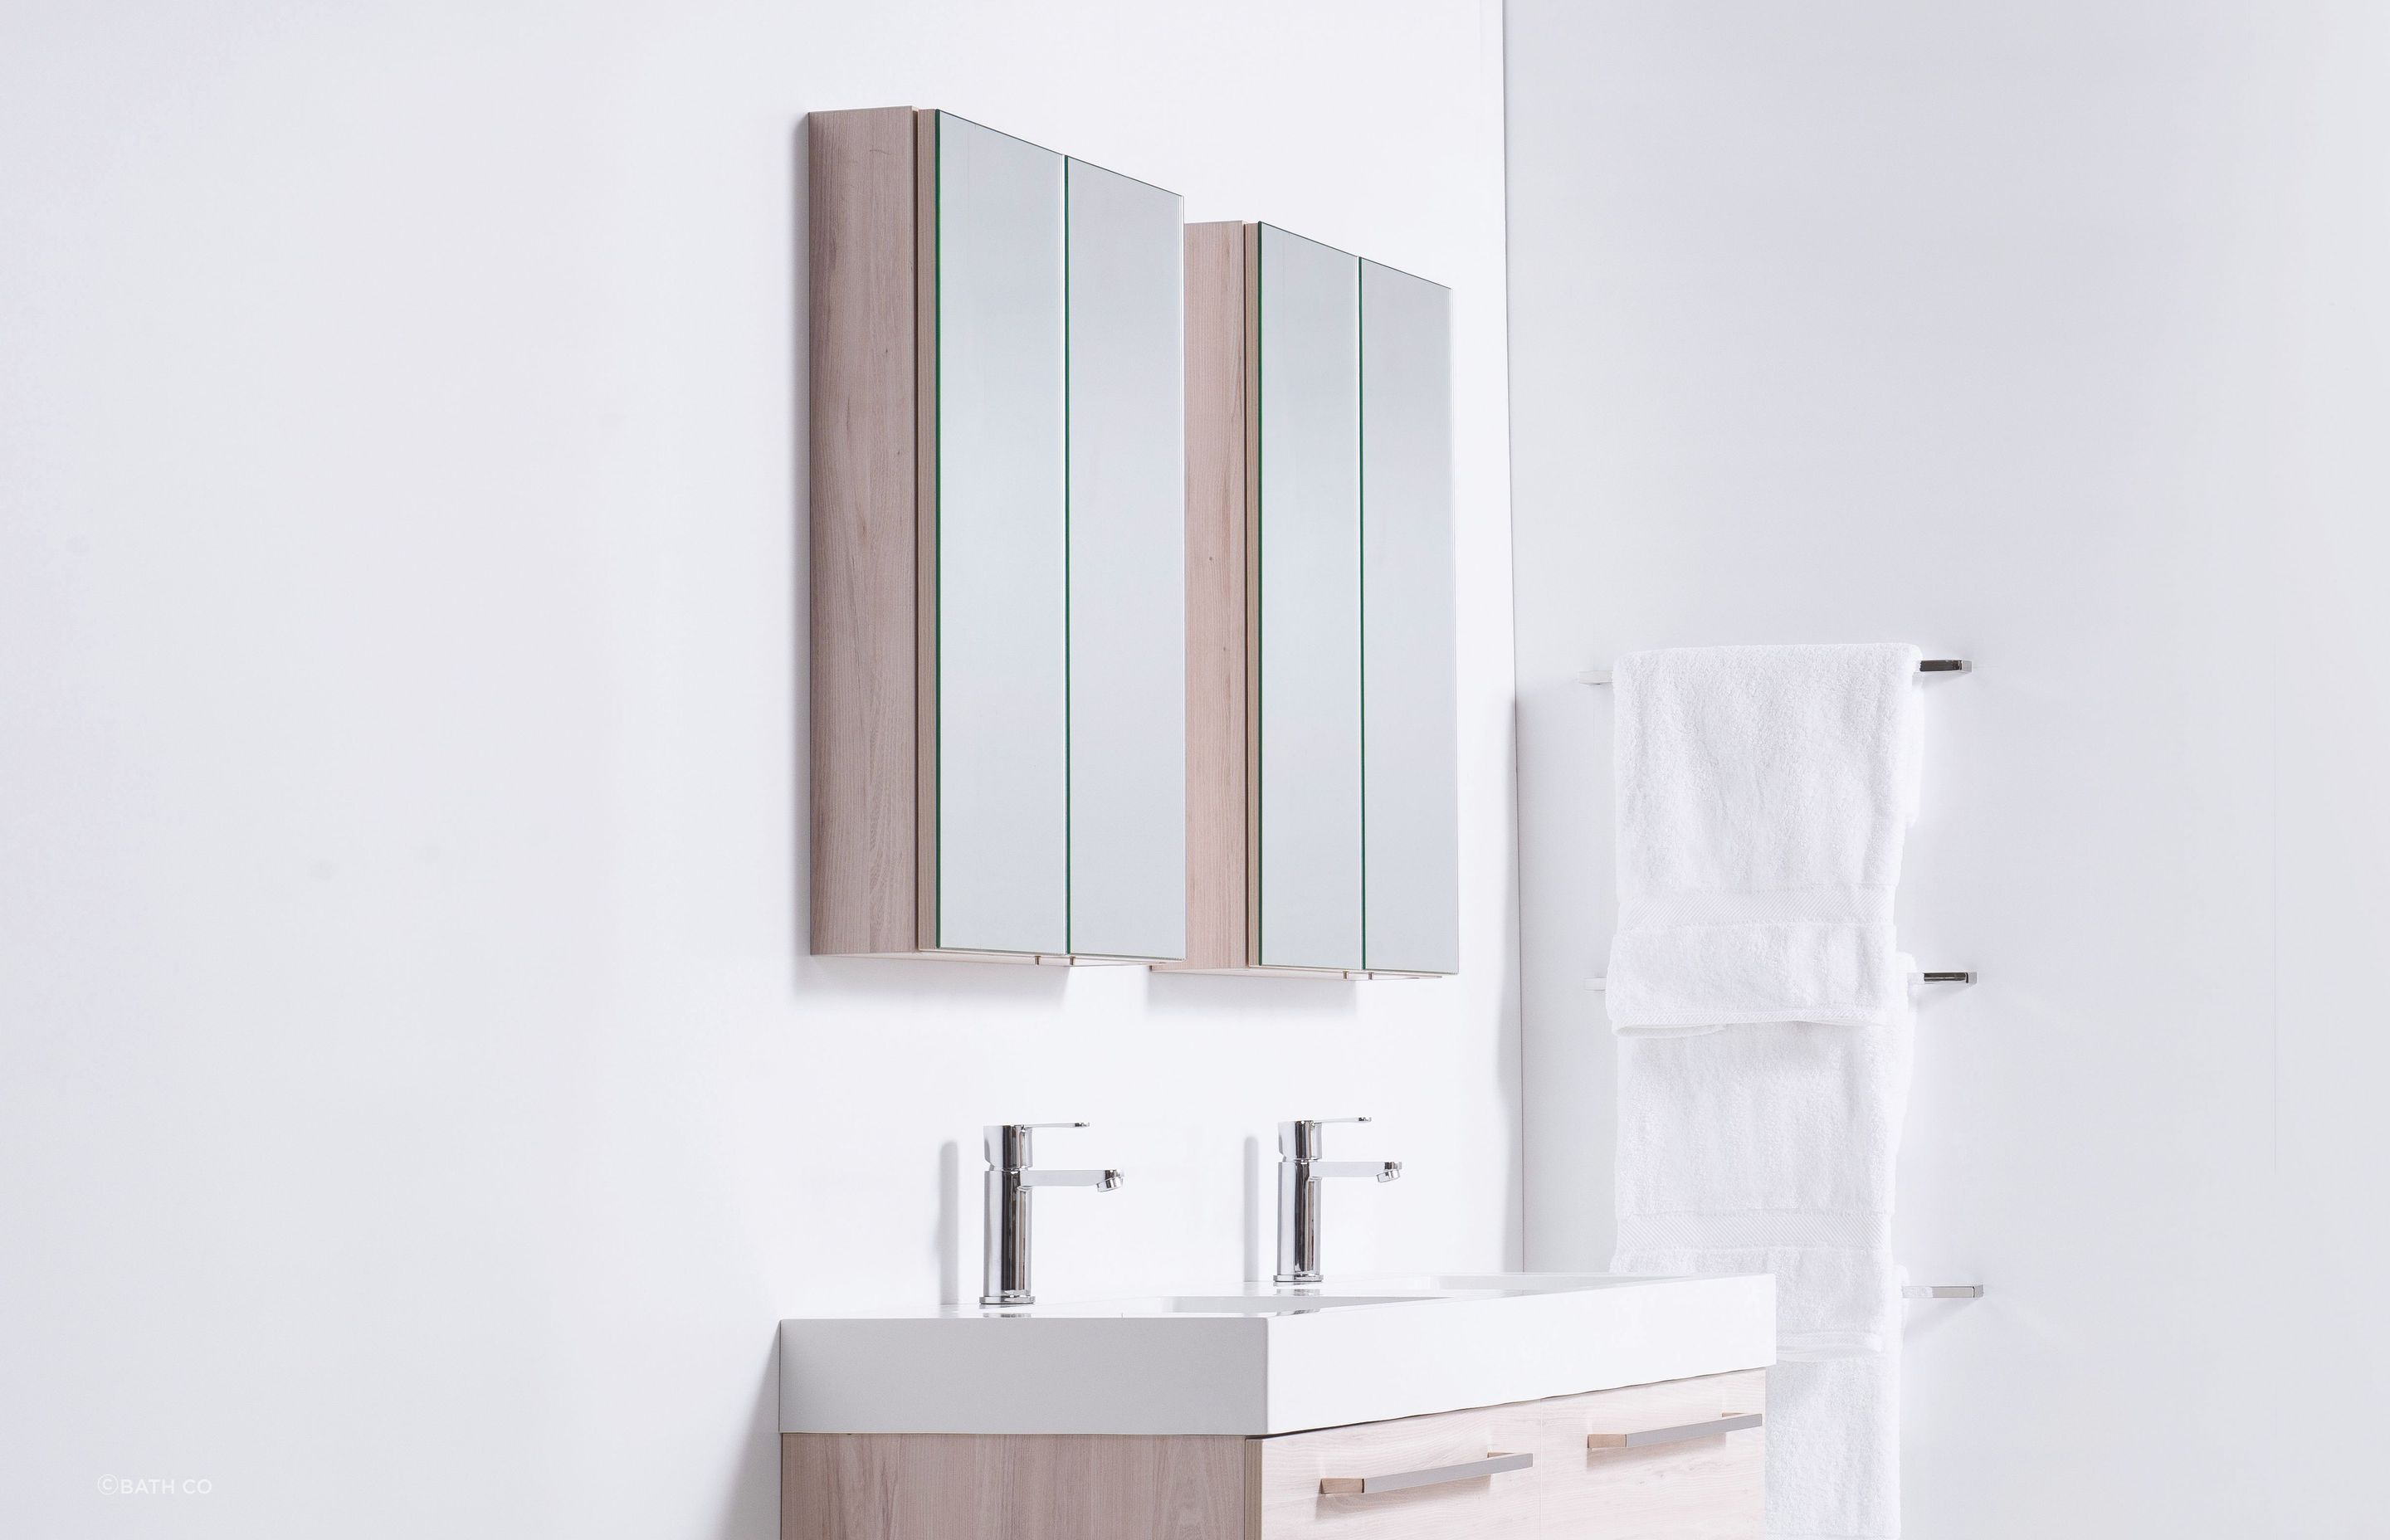 Bathroom Mirror Cabinets are a functional, multipurpose solution, practical for any bathroom size. Image Credit: Bath Co